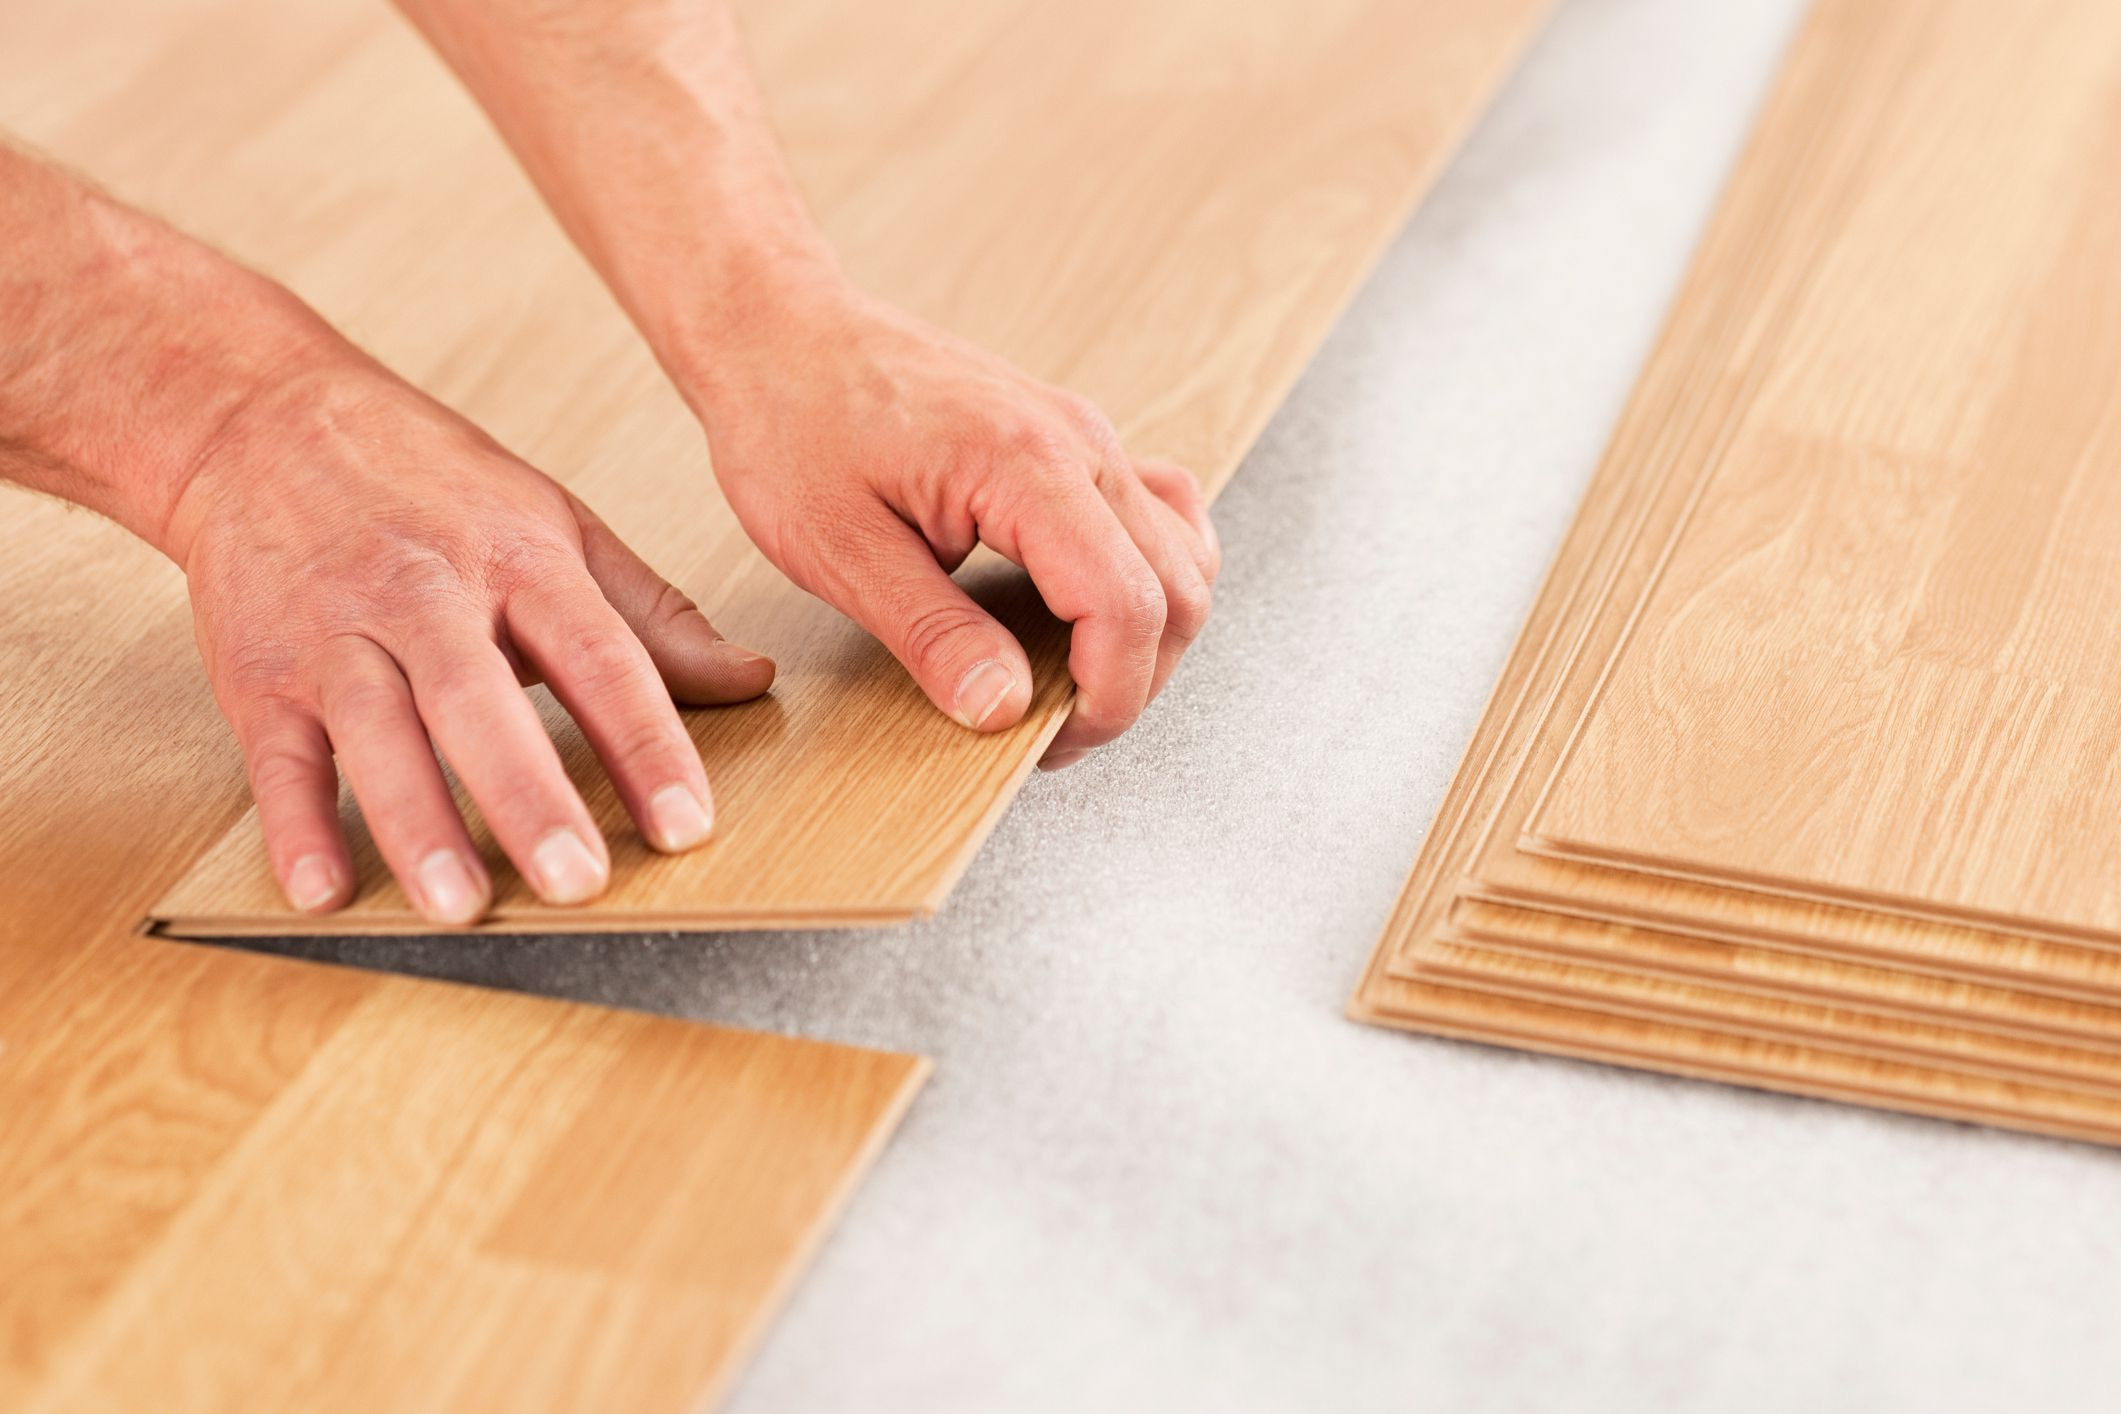 cost to install hardwood floors on stairs of laminate underlayment pros and cons throughout laminate floor install gettyimages 154961561 588816495f9b58bdb3da1a02